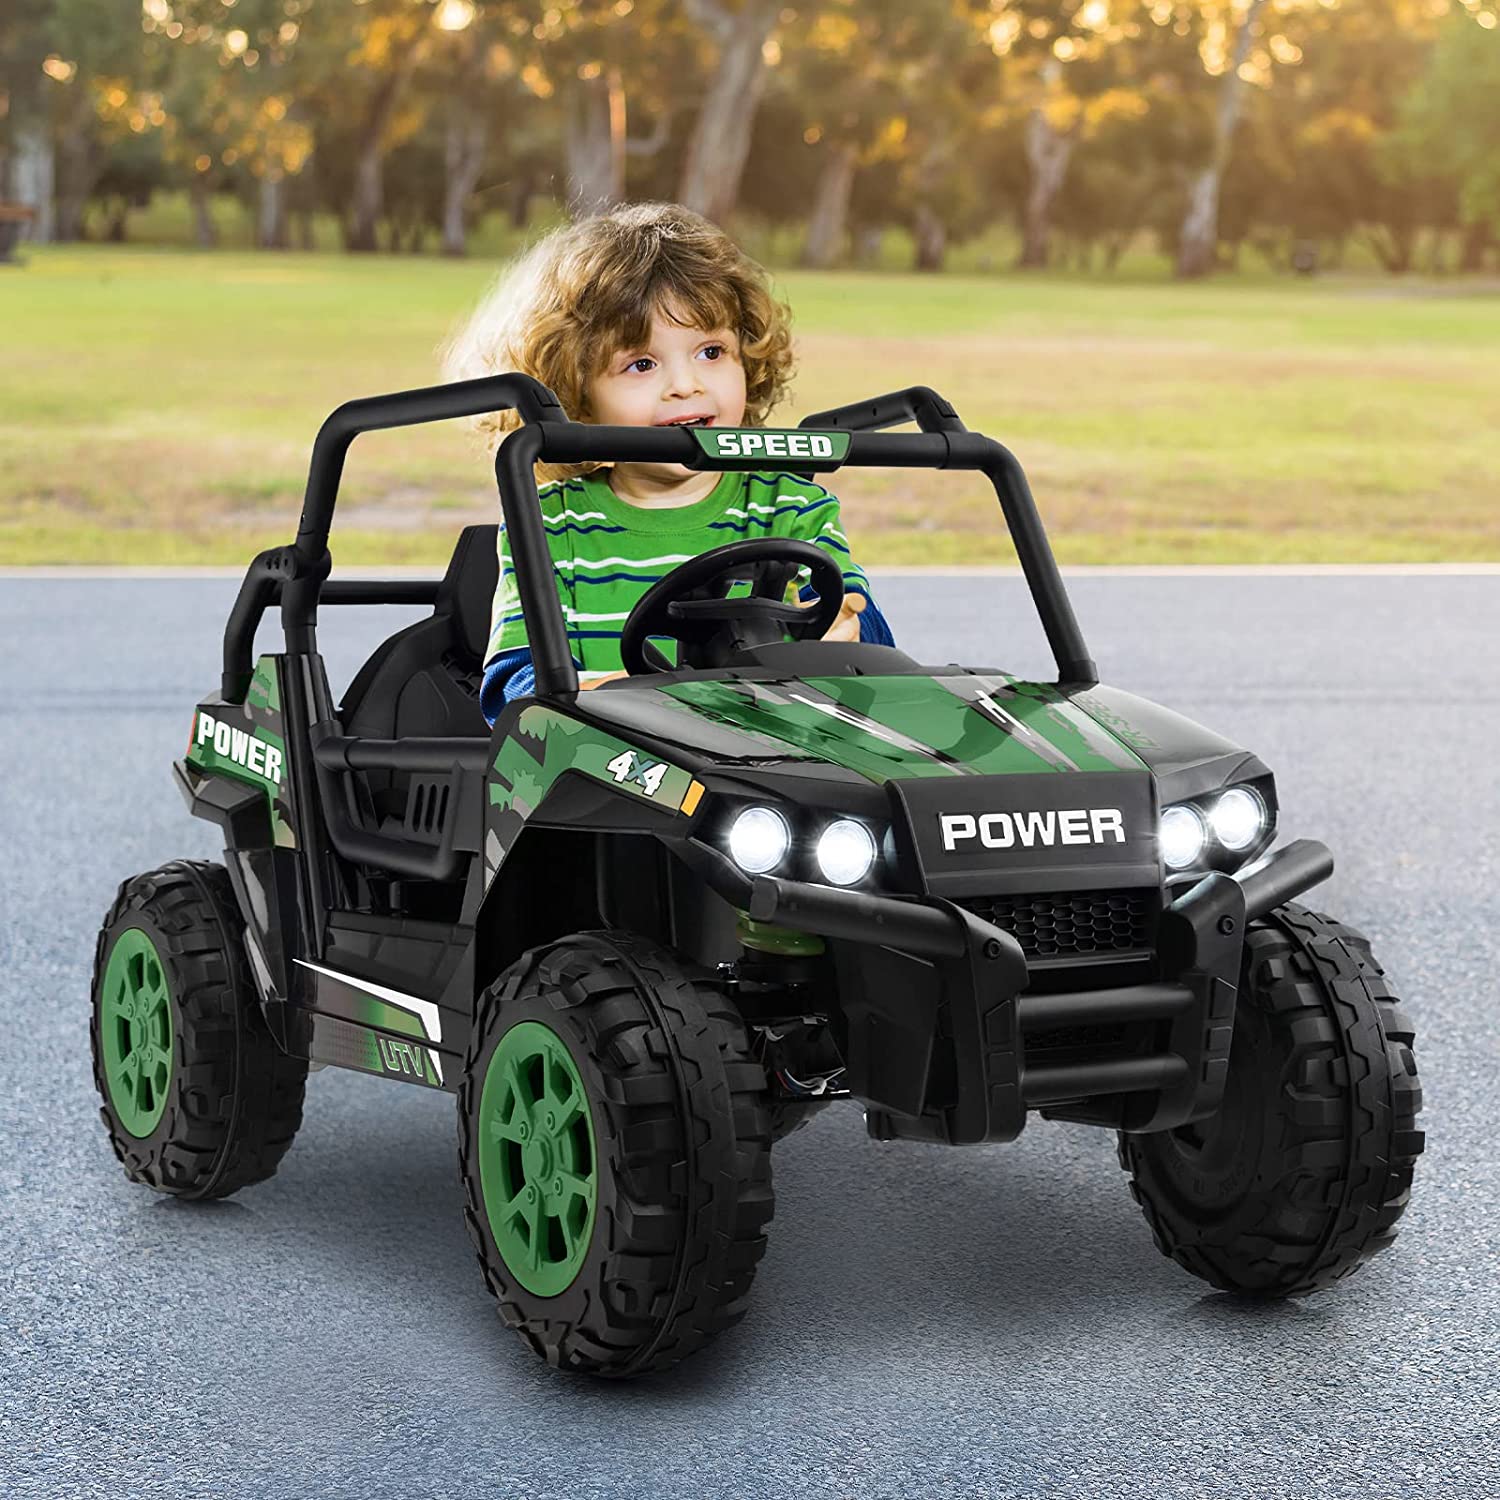 Chairliving 12V Kids Ride On UTV Car Battery Powered Off-Road Buggy Truck with Remote Control USB Port for Boys Girls